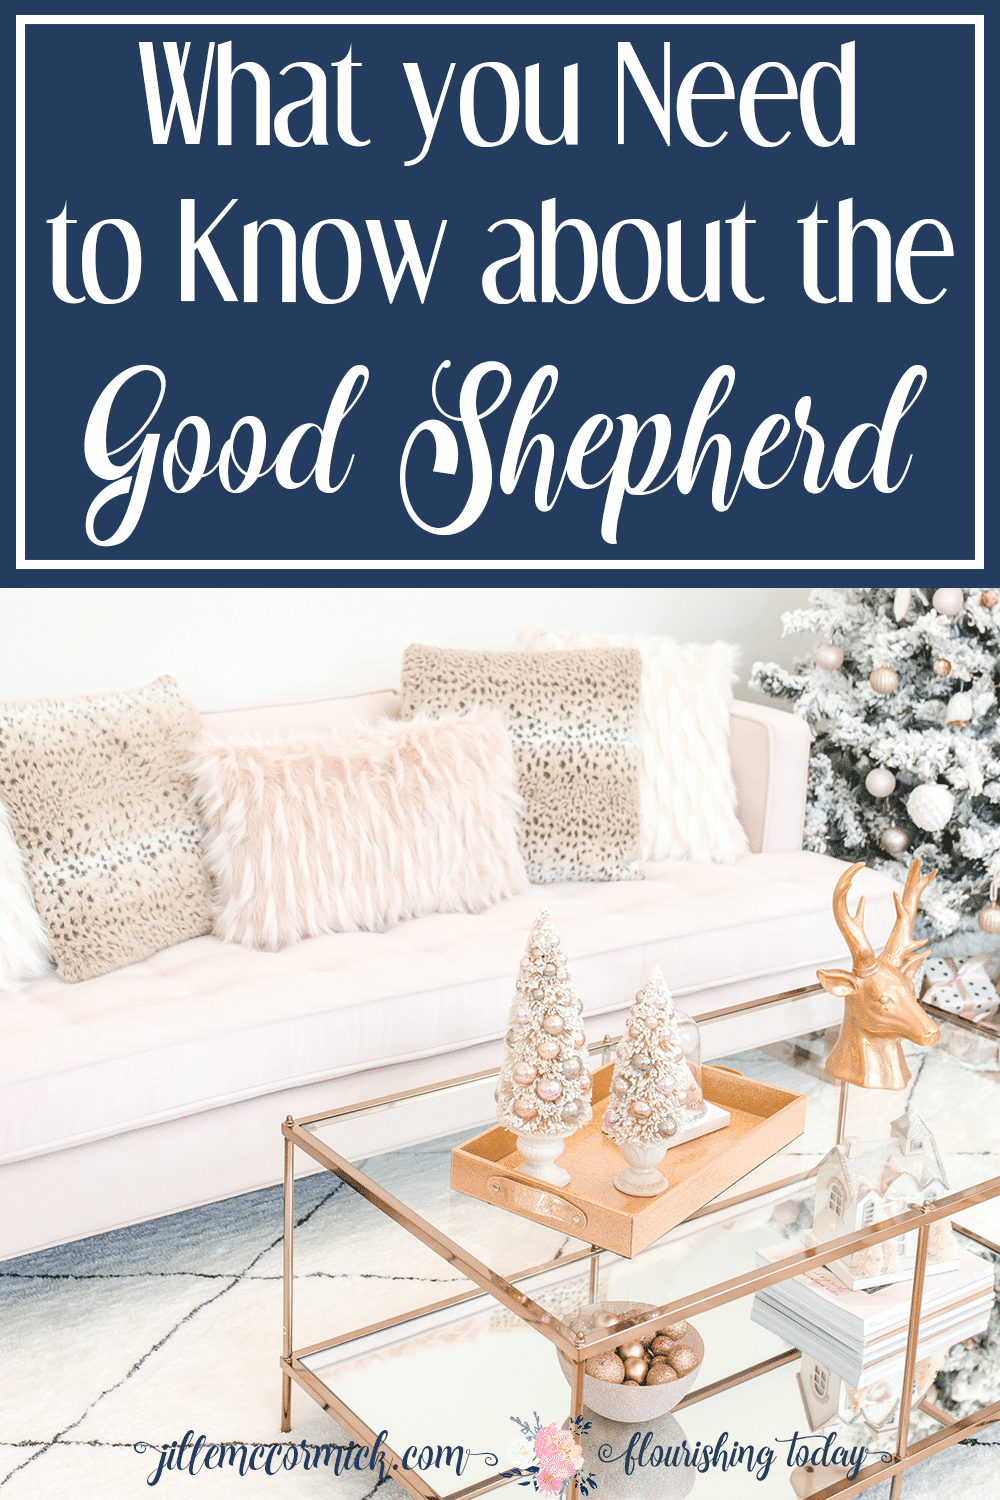 Do you know Jesus the Good Shepherd? What better way to celebrate Christmas than to get to know Him. Here's 3 things you should know about the Good Shepherd